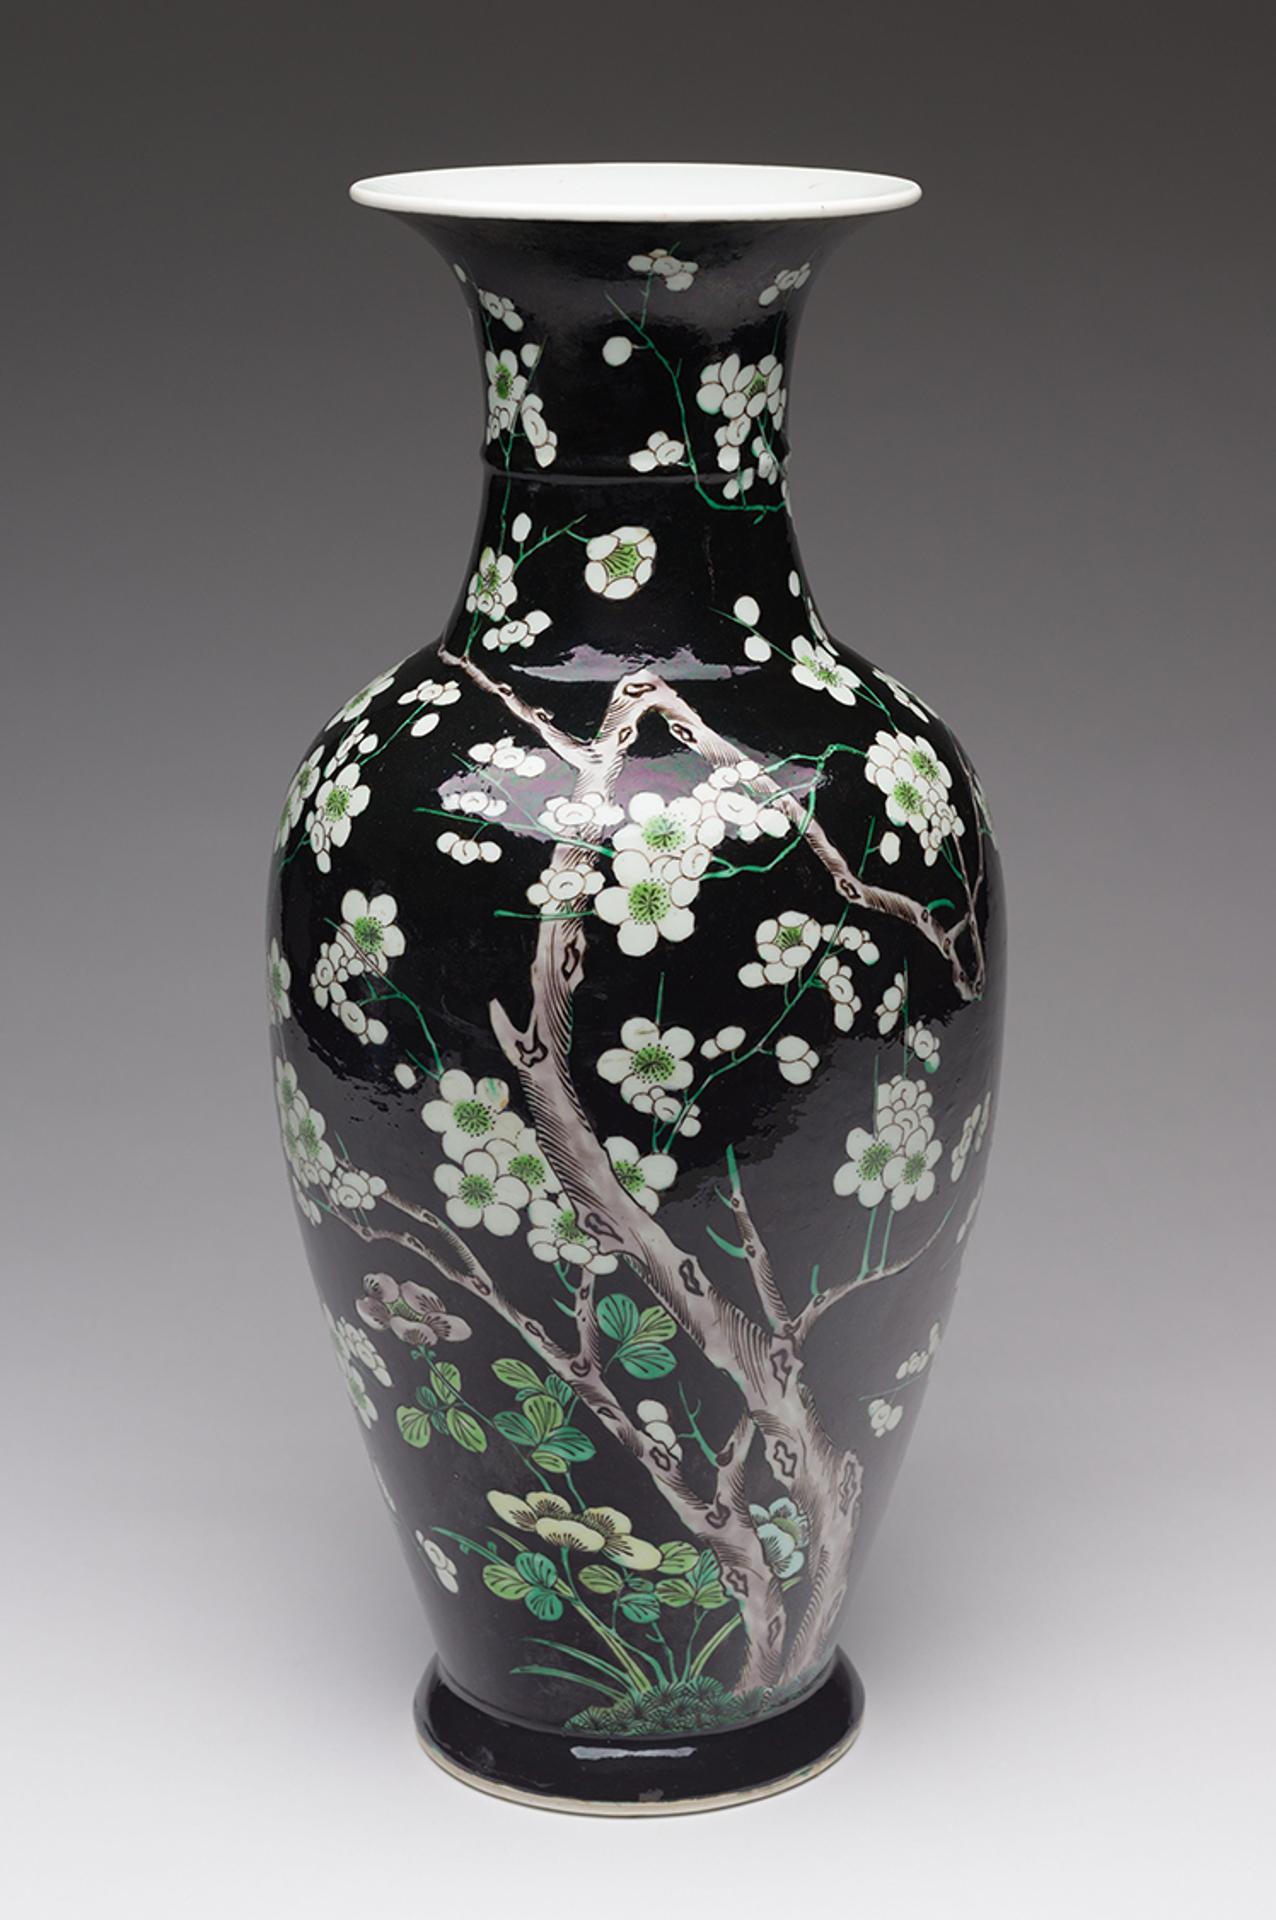 Chinese Art - A Chinese Famille Noire 'Prunus' Baluster Vase, Late Qing Dynasty